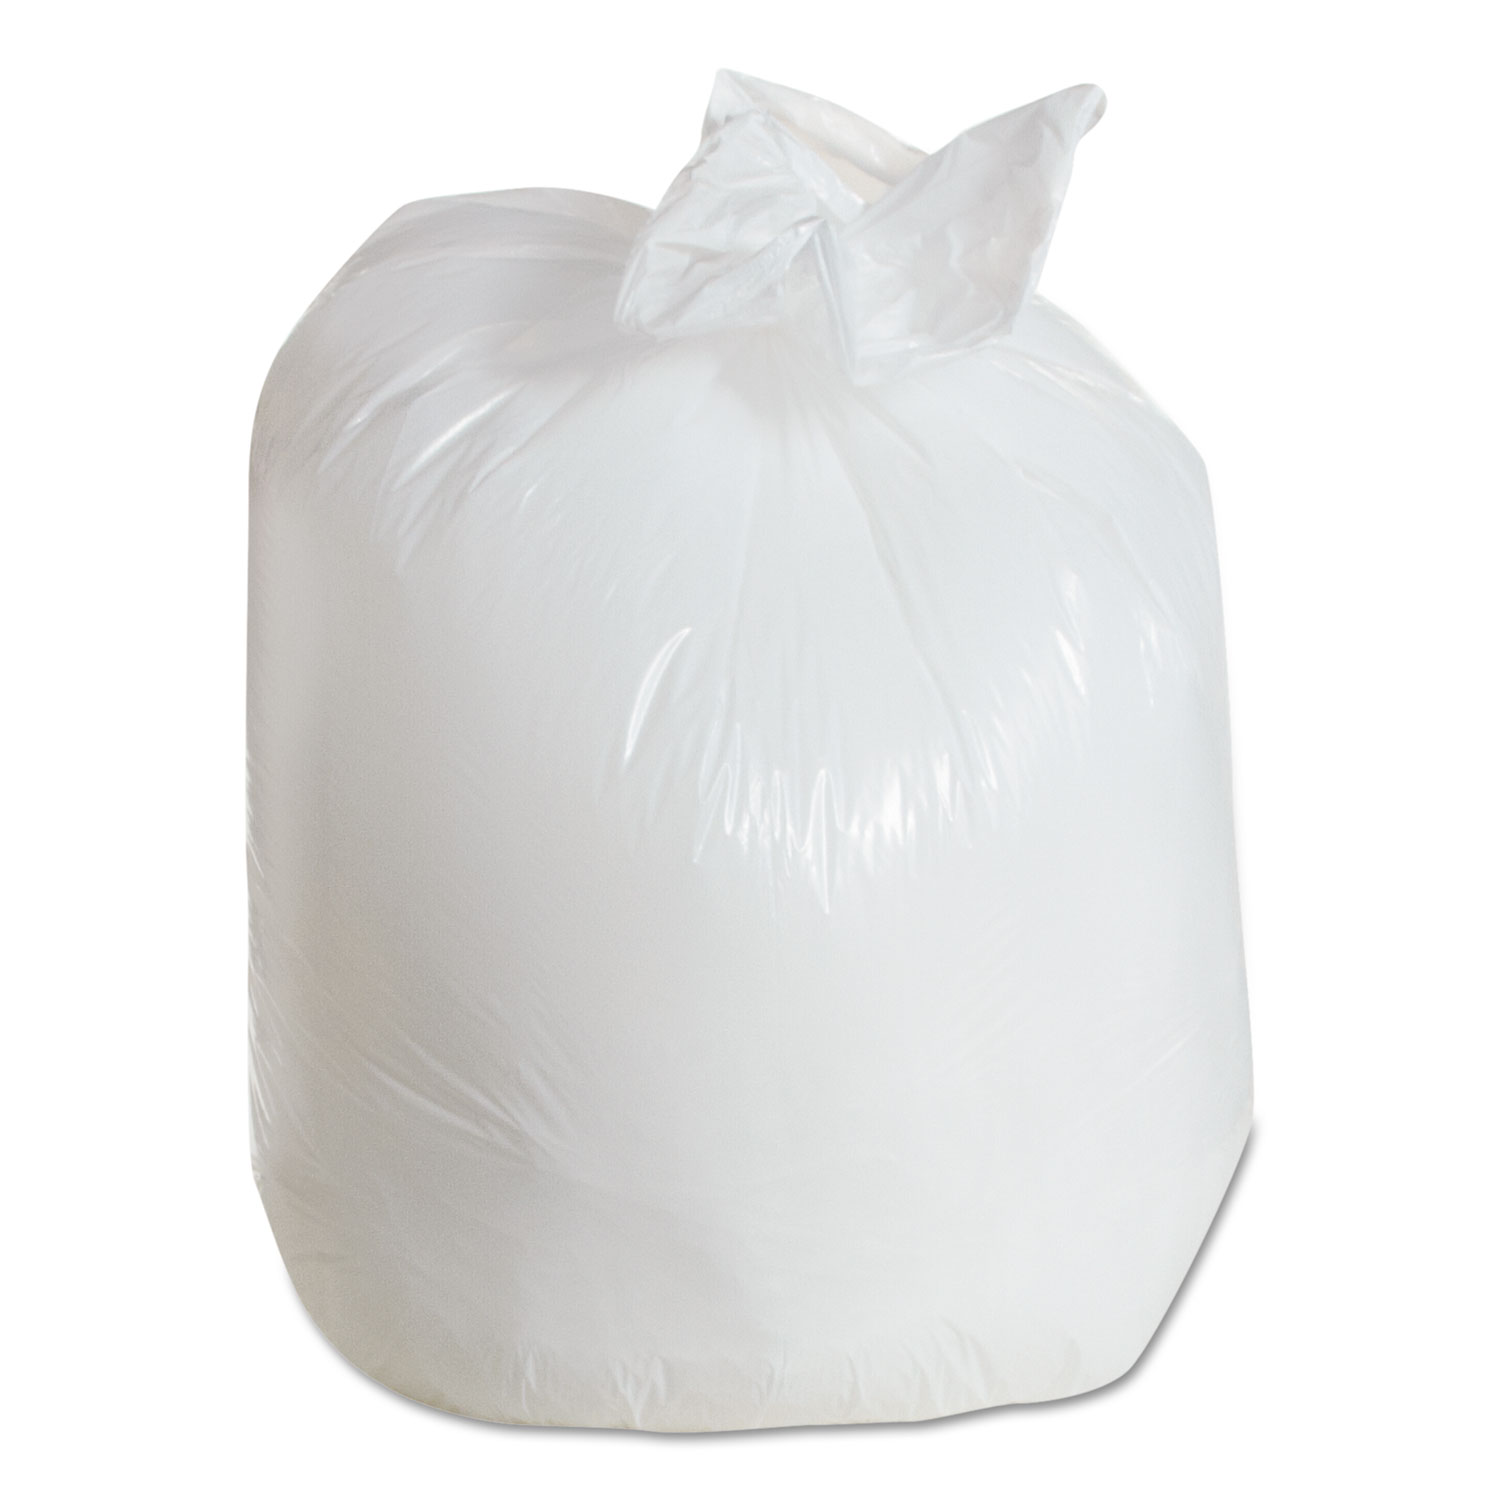  FlexSol ST39 Low Density Can Liners, 33 gal, 0.8 mil, 33 x 39, White, 150/Carton (ESXST39) 